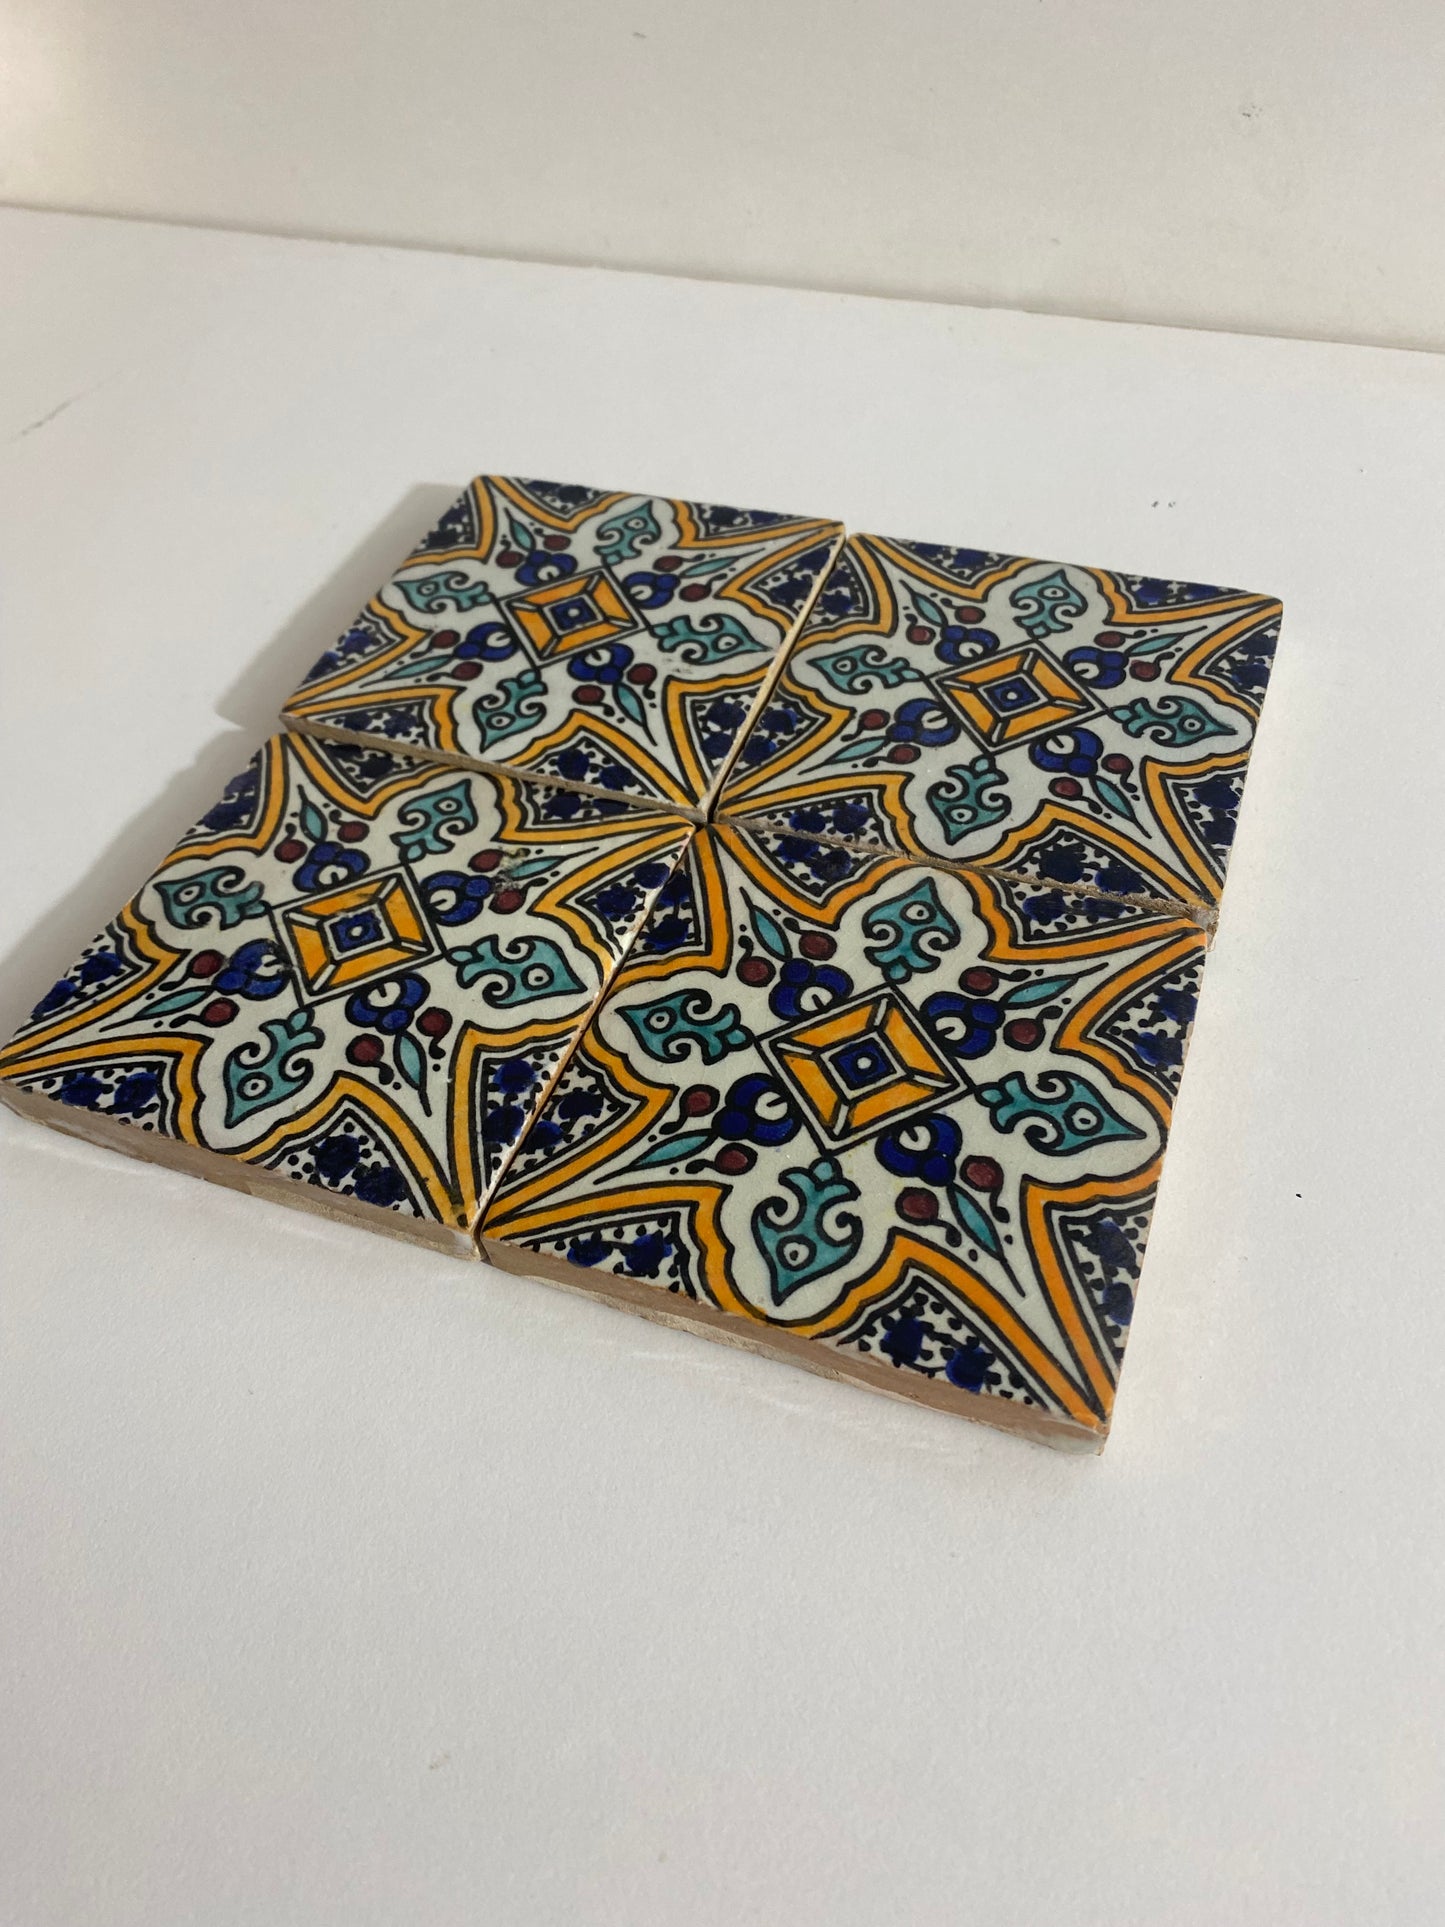 Marrakech Ceramic tiles Hand painted backsplash tiles 4"x4" 100% Handmade for Bathroom Remodeling and kitchen Projects works wall and ground